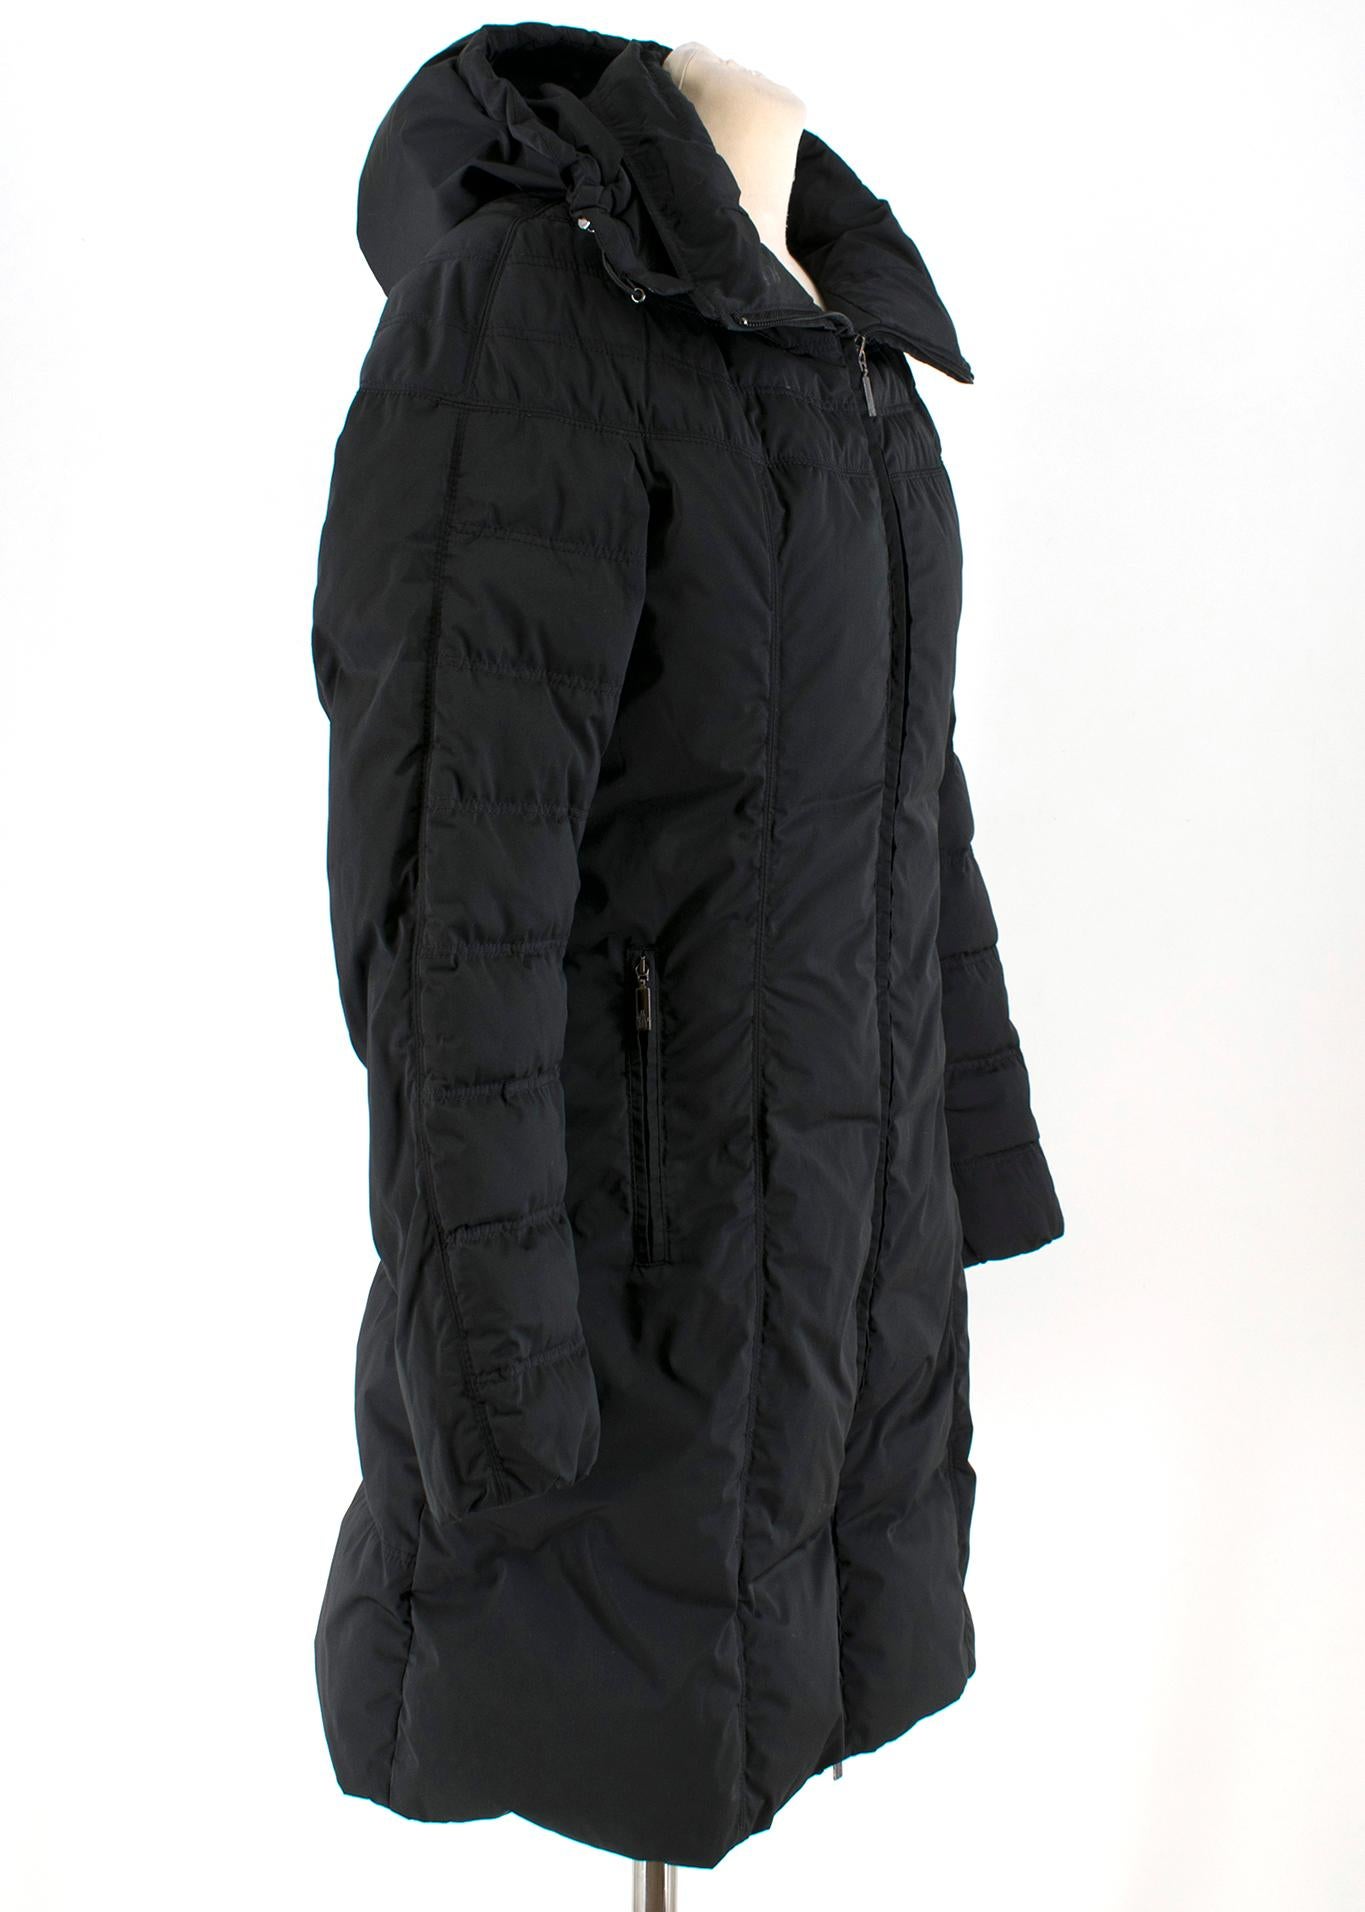 Moncler Black Long Down Filled Hooded Jacket

- Long black jacket with hood
- Mid-Heavy weight 
- Zip fastening at the front 
- Two front pockets 

Please note, these items are pre-owned and may show some signs of storage, even when unworn and